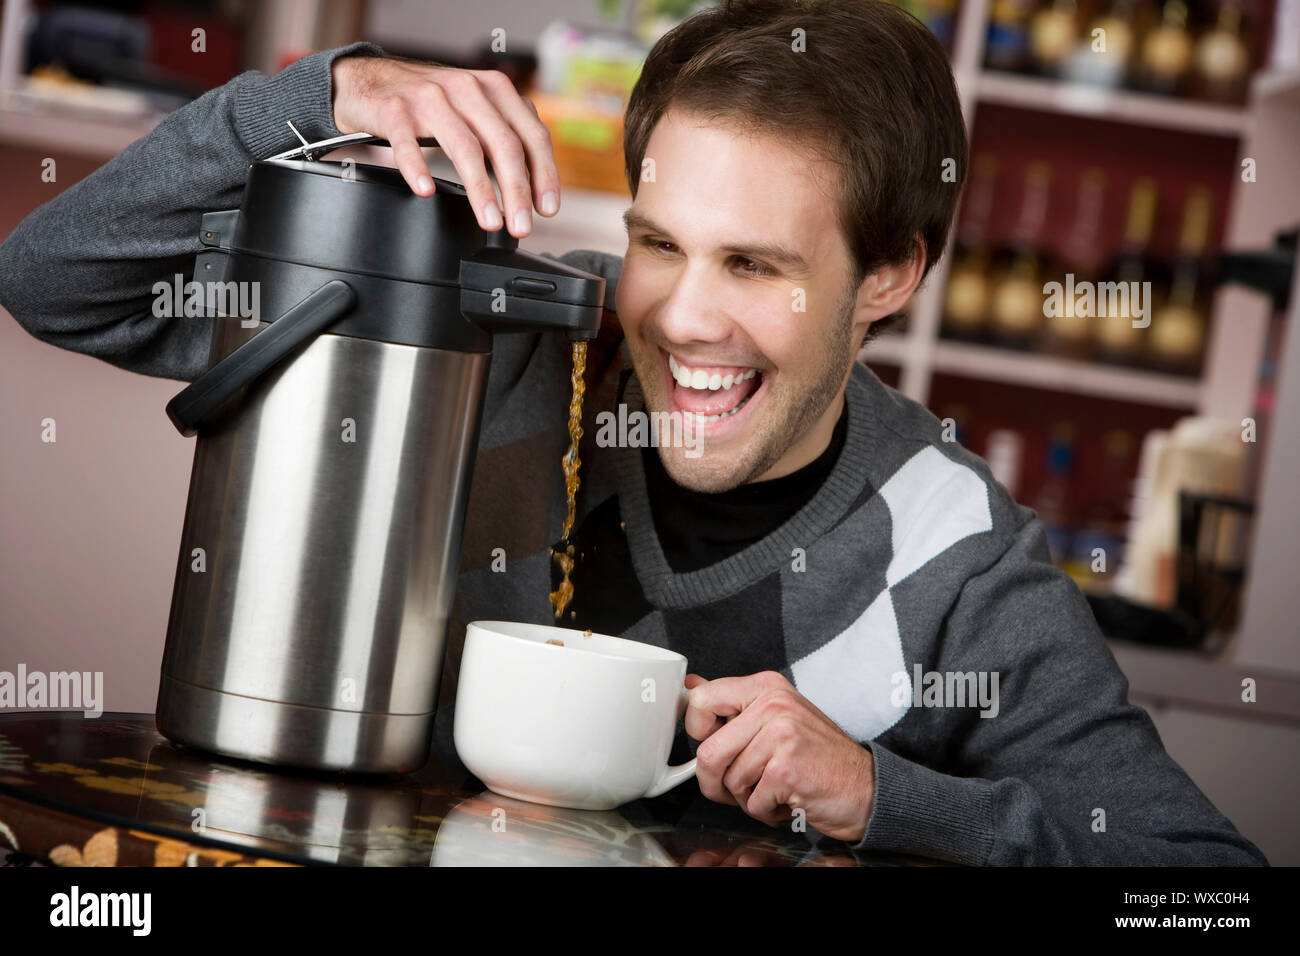 Young man crazily pouring coffee from a thermos in a cafe Stock Photo